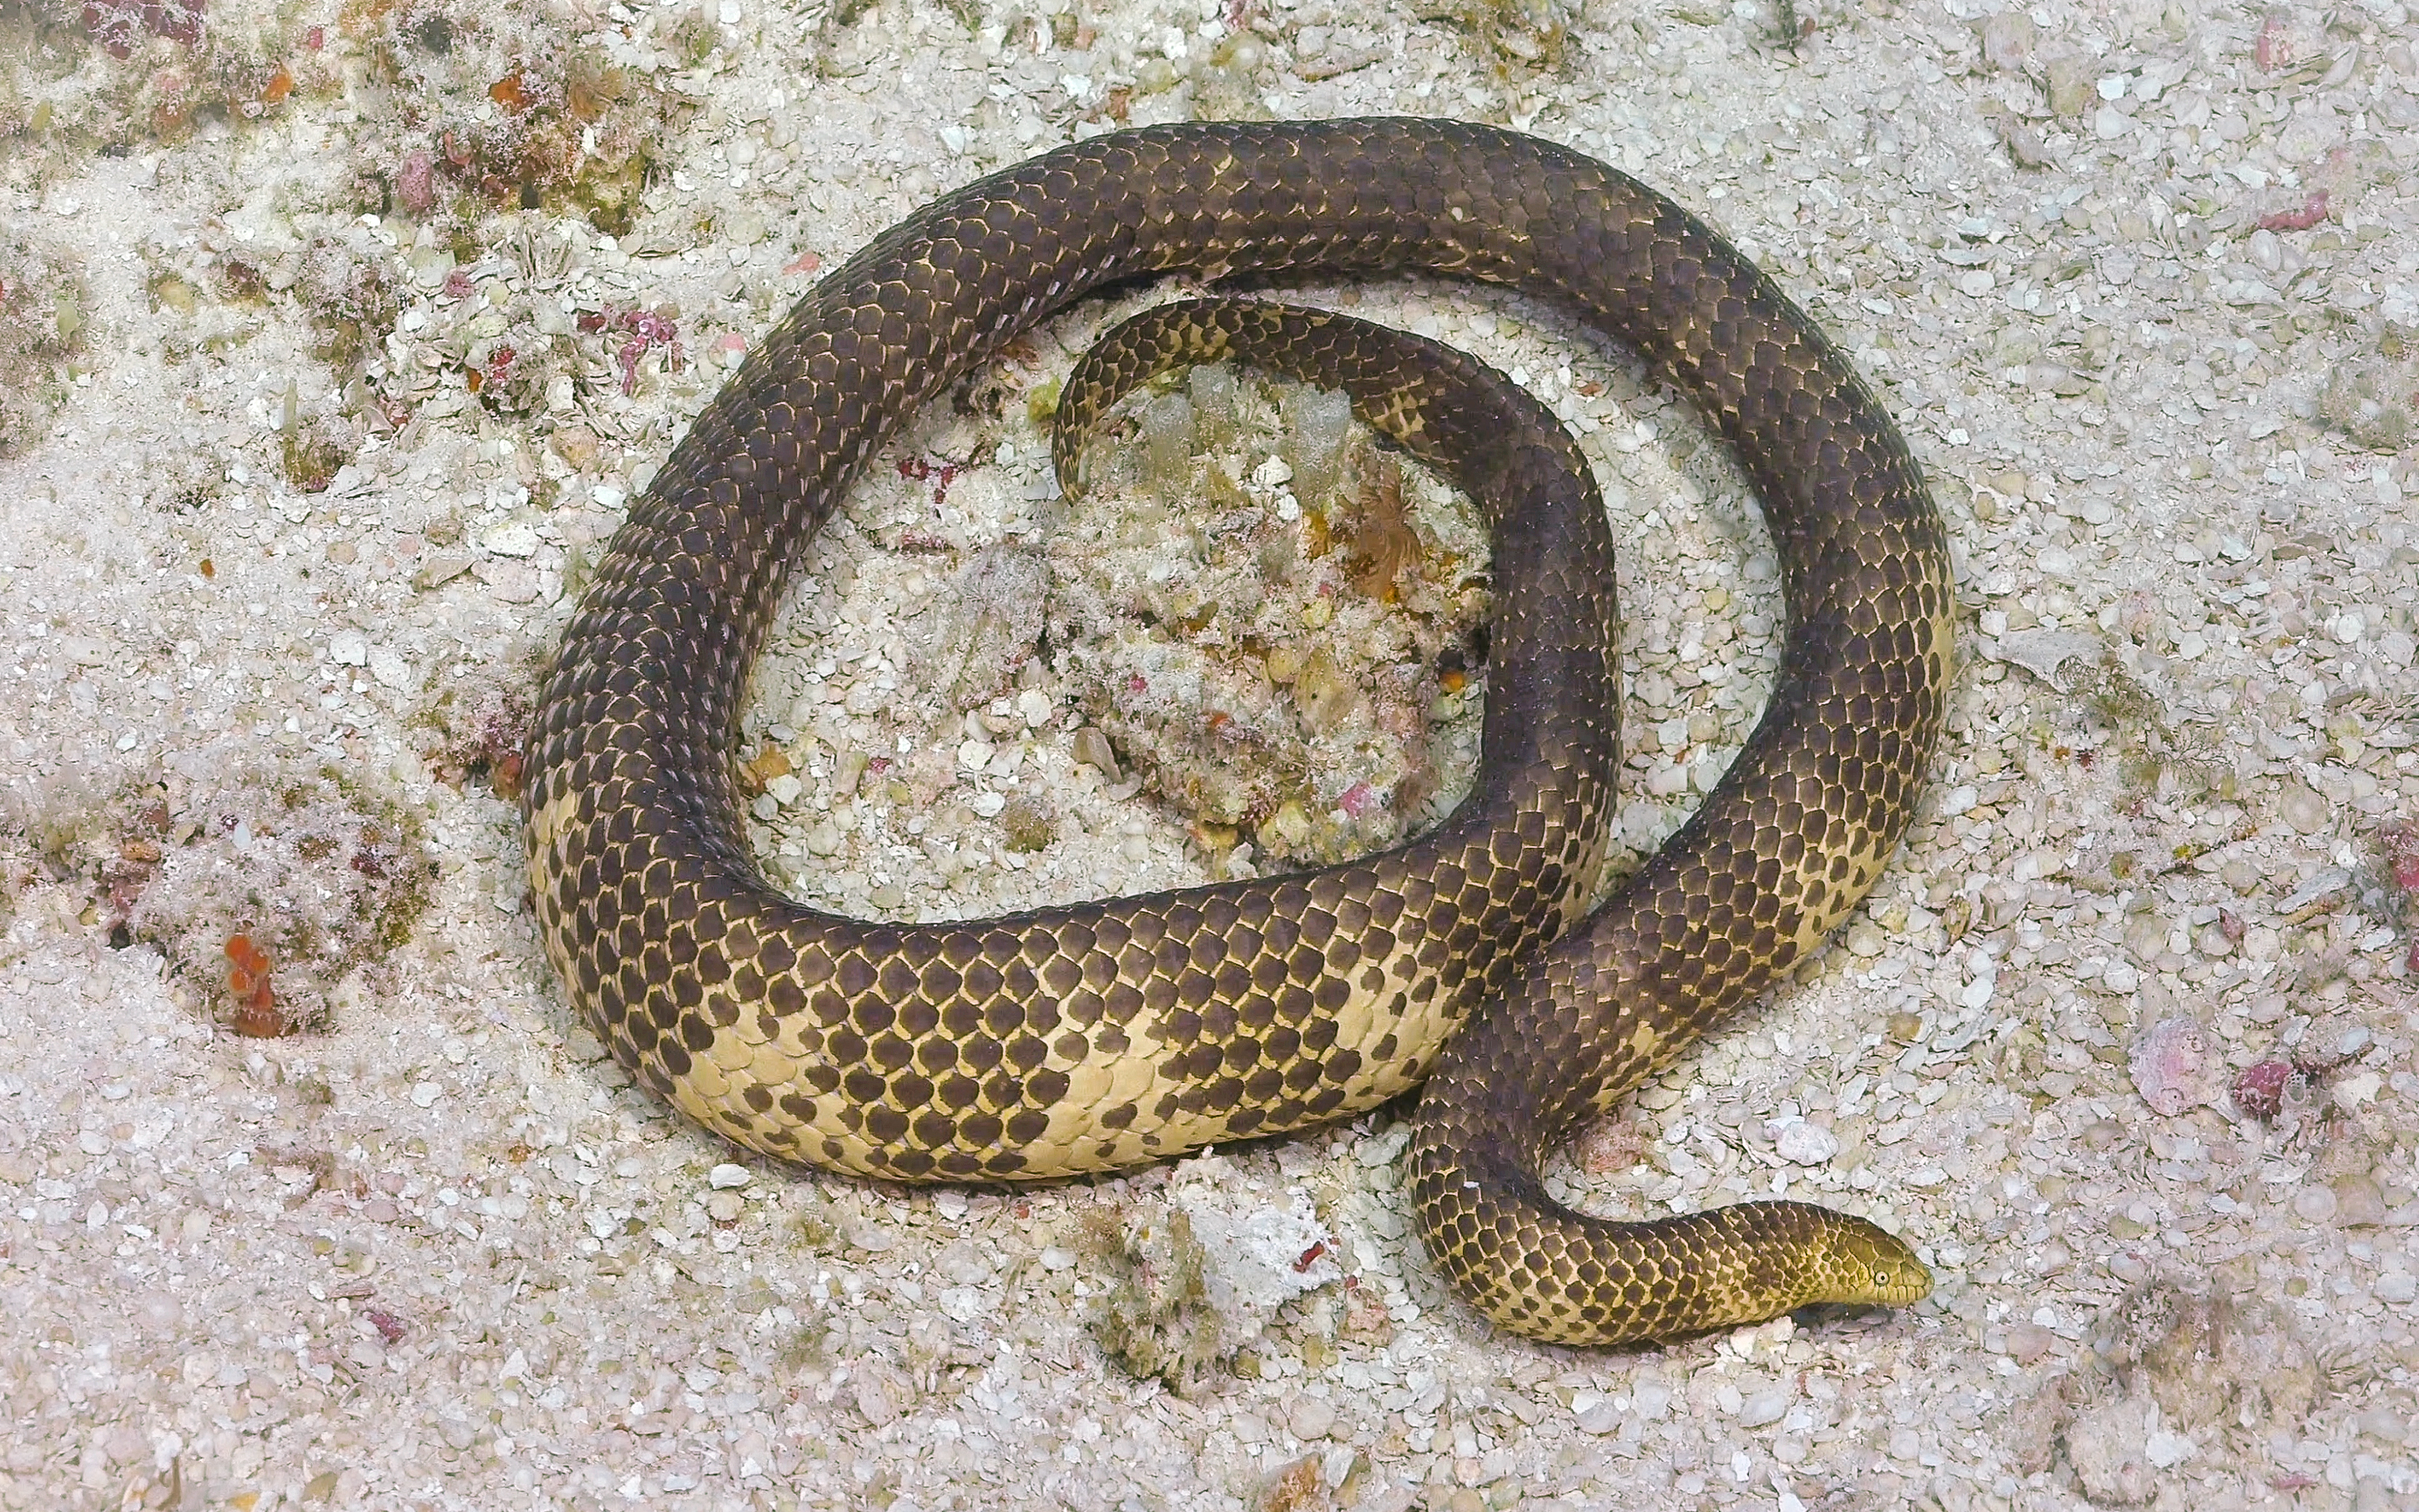 At the end of Dive 406 (Monday April 12, 2021) a short-nosed sea snake or Sahul reef snake and second sea snake species for the day was spotted on Ashmore Reef at 67m. The Ashmore population of Aipysurus Apraefrontalis is functionally extinct in Ashmore's shallower waters, but the discovery of the critically endangered snake in the deeper reef potentially identifies a new breeding population.